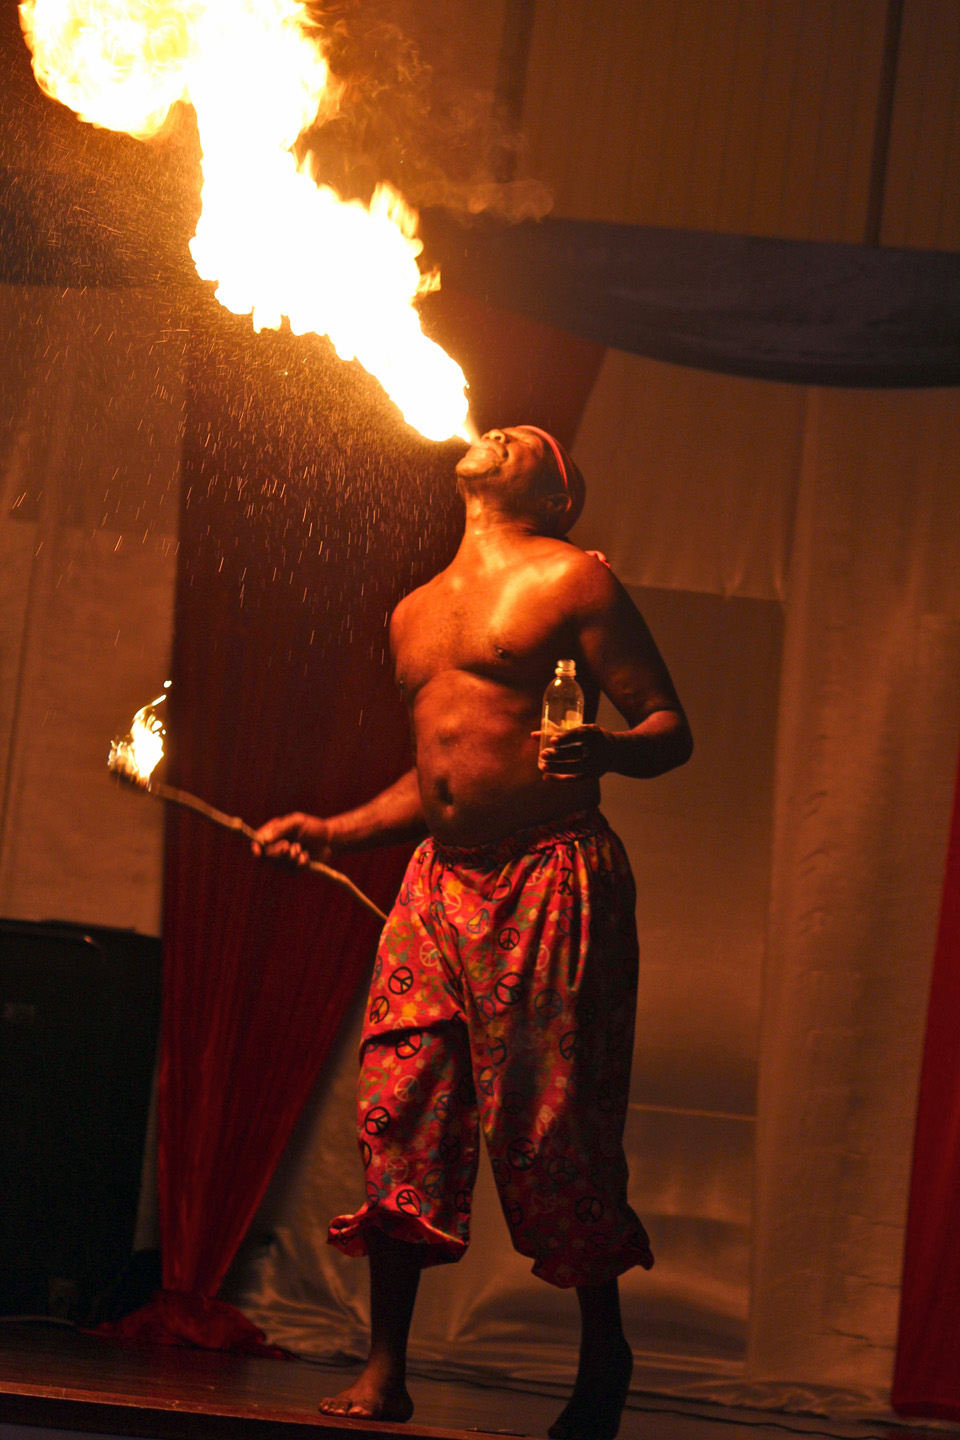 Performer playing with fire, do not try this at home! In Montego Bay, Jamaica with my family. Photo courtesy Noor Al Shaikh, EC and E